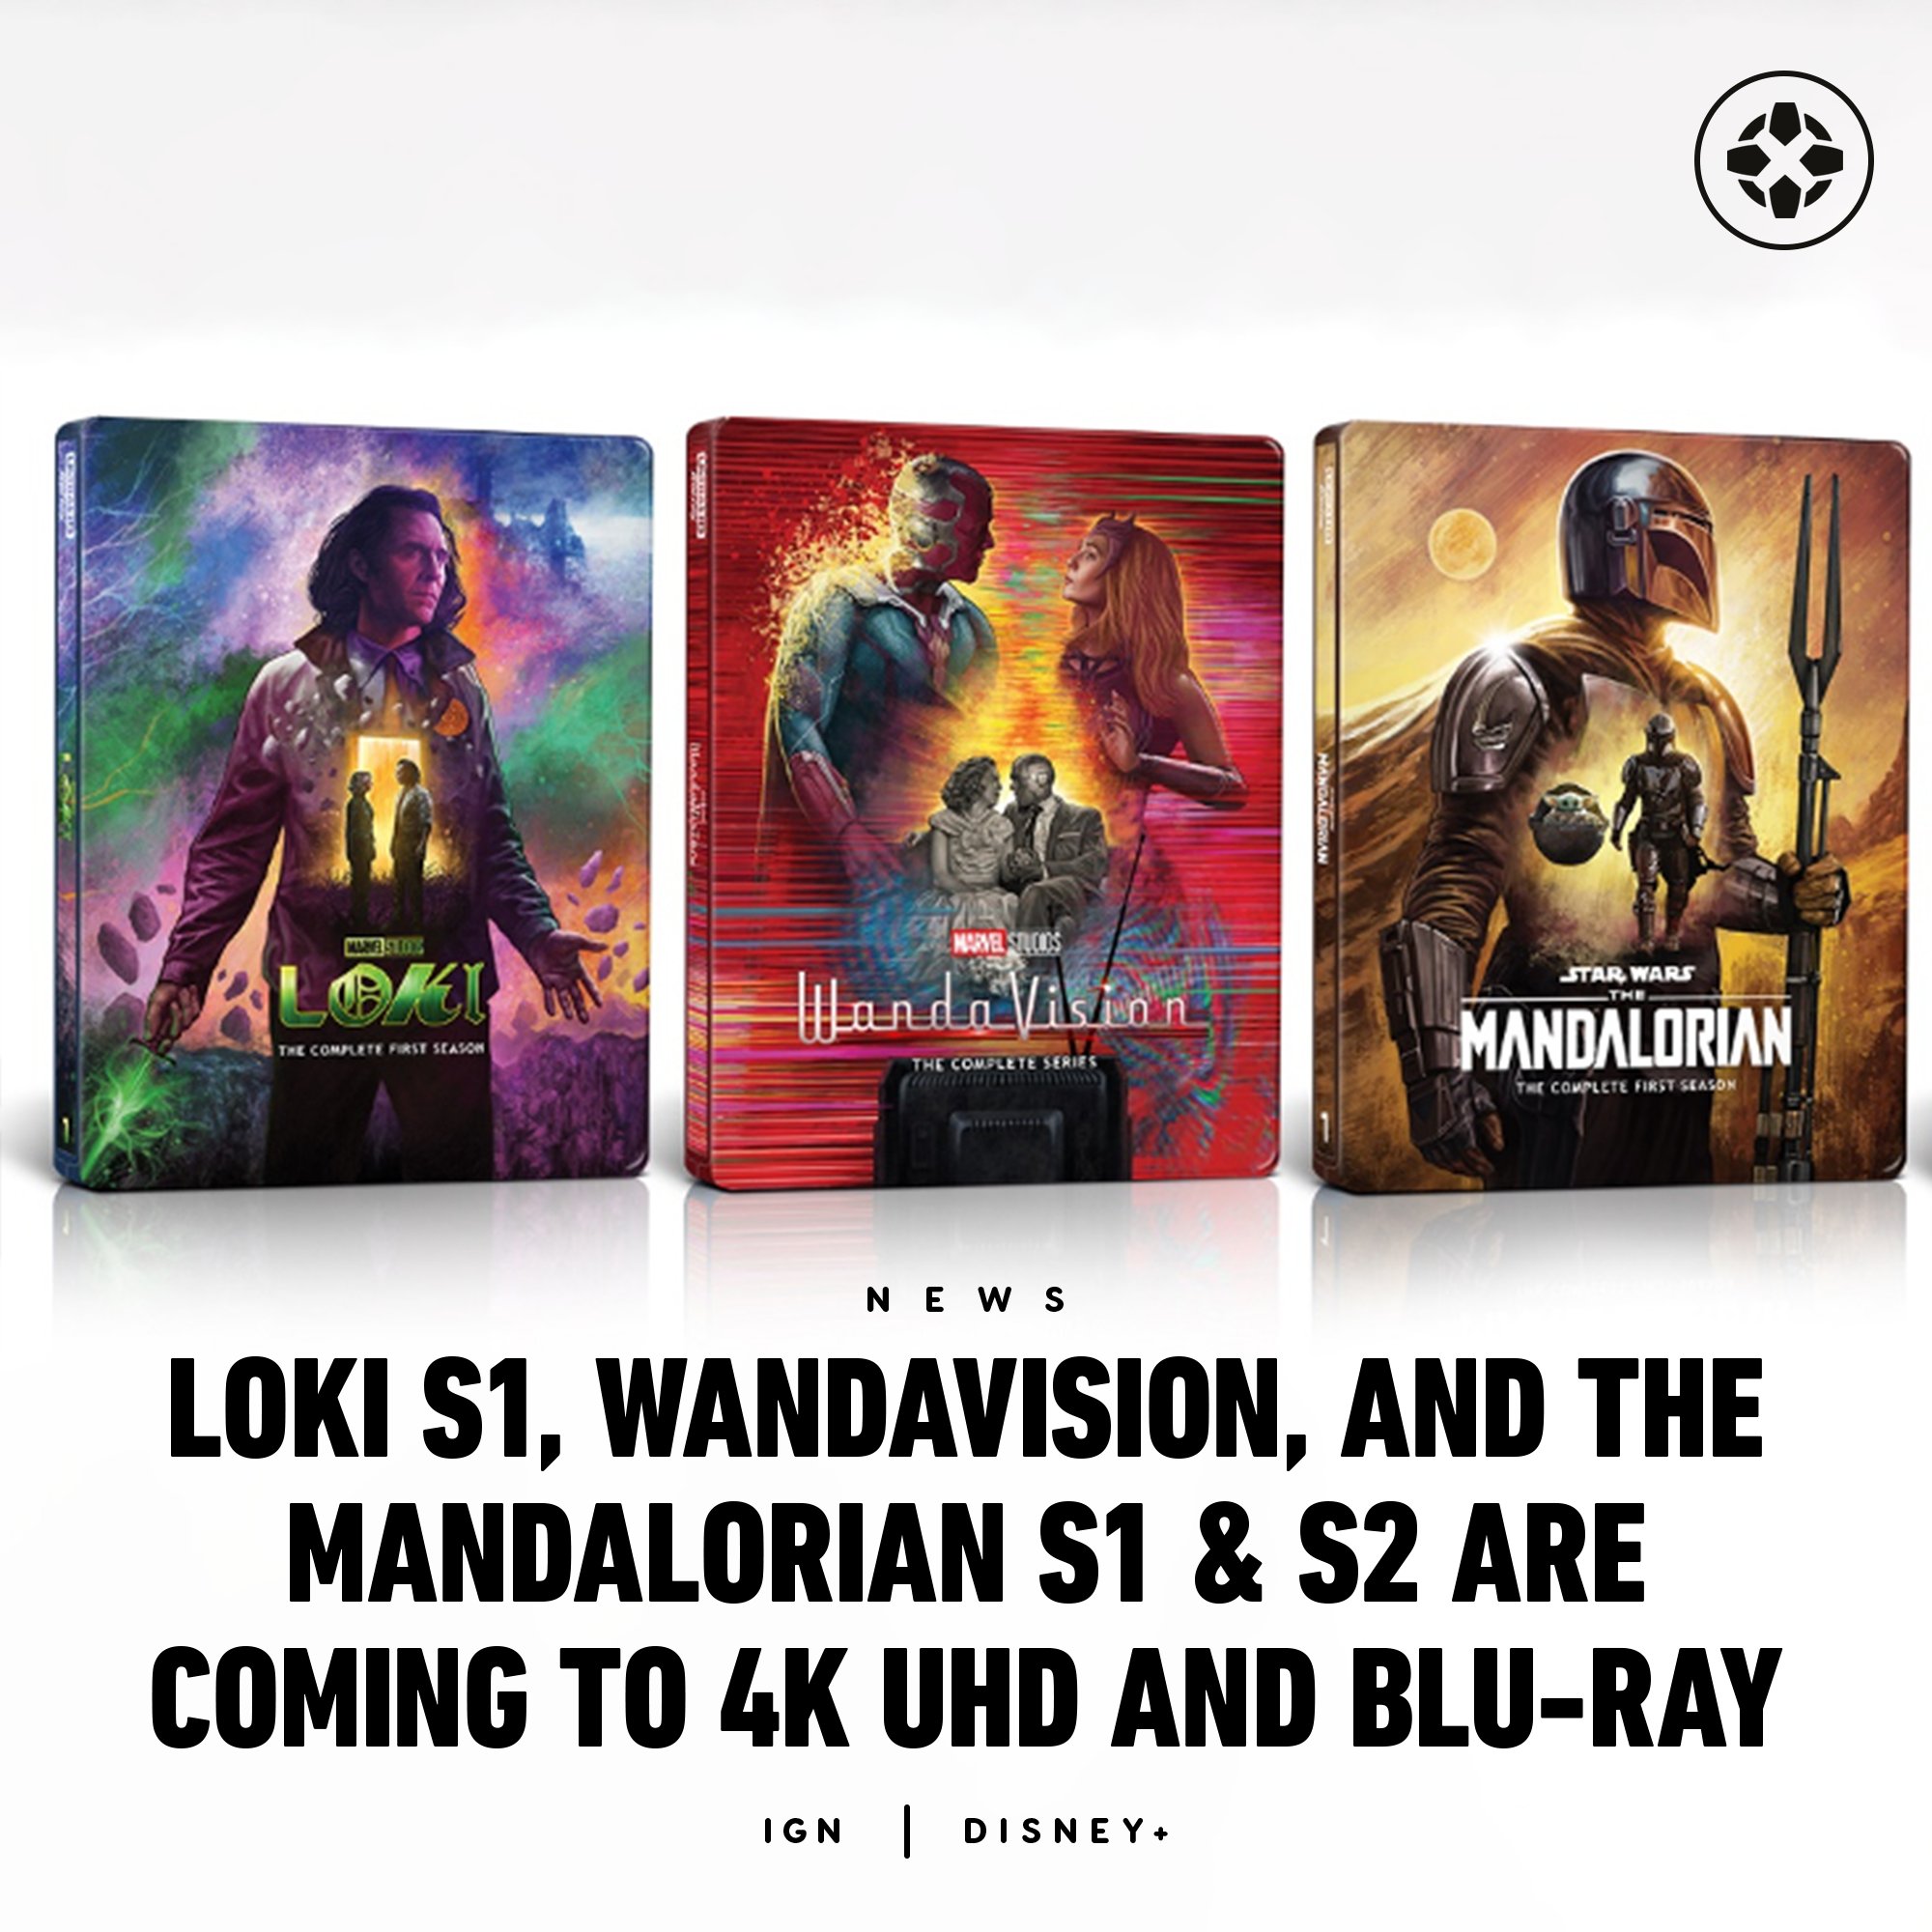 IGN on X: Disney have confirmed that Loki Season 1, WandaVision, and  seasons 1 & 2 of The Mandalorian will be available in Collector's Edition  4K UHD and Blu-ray, featuring Steelbook packaging